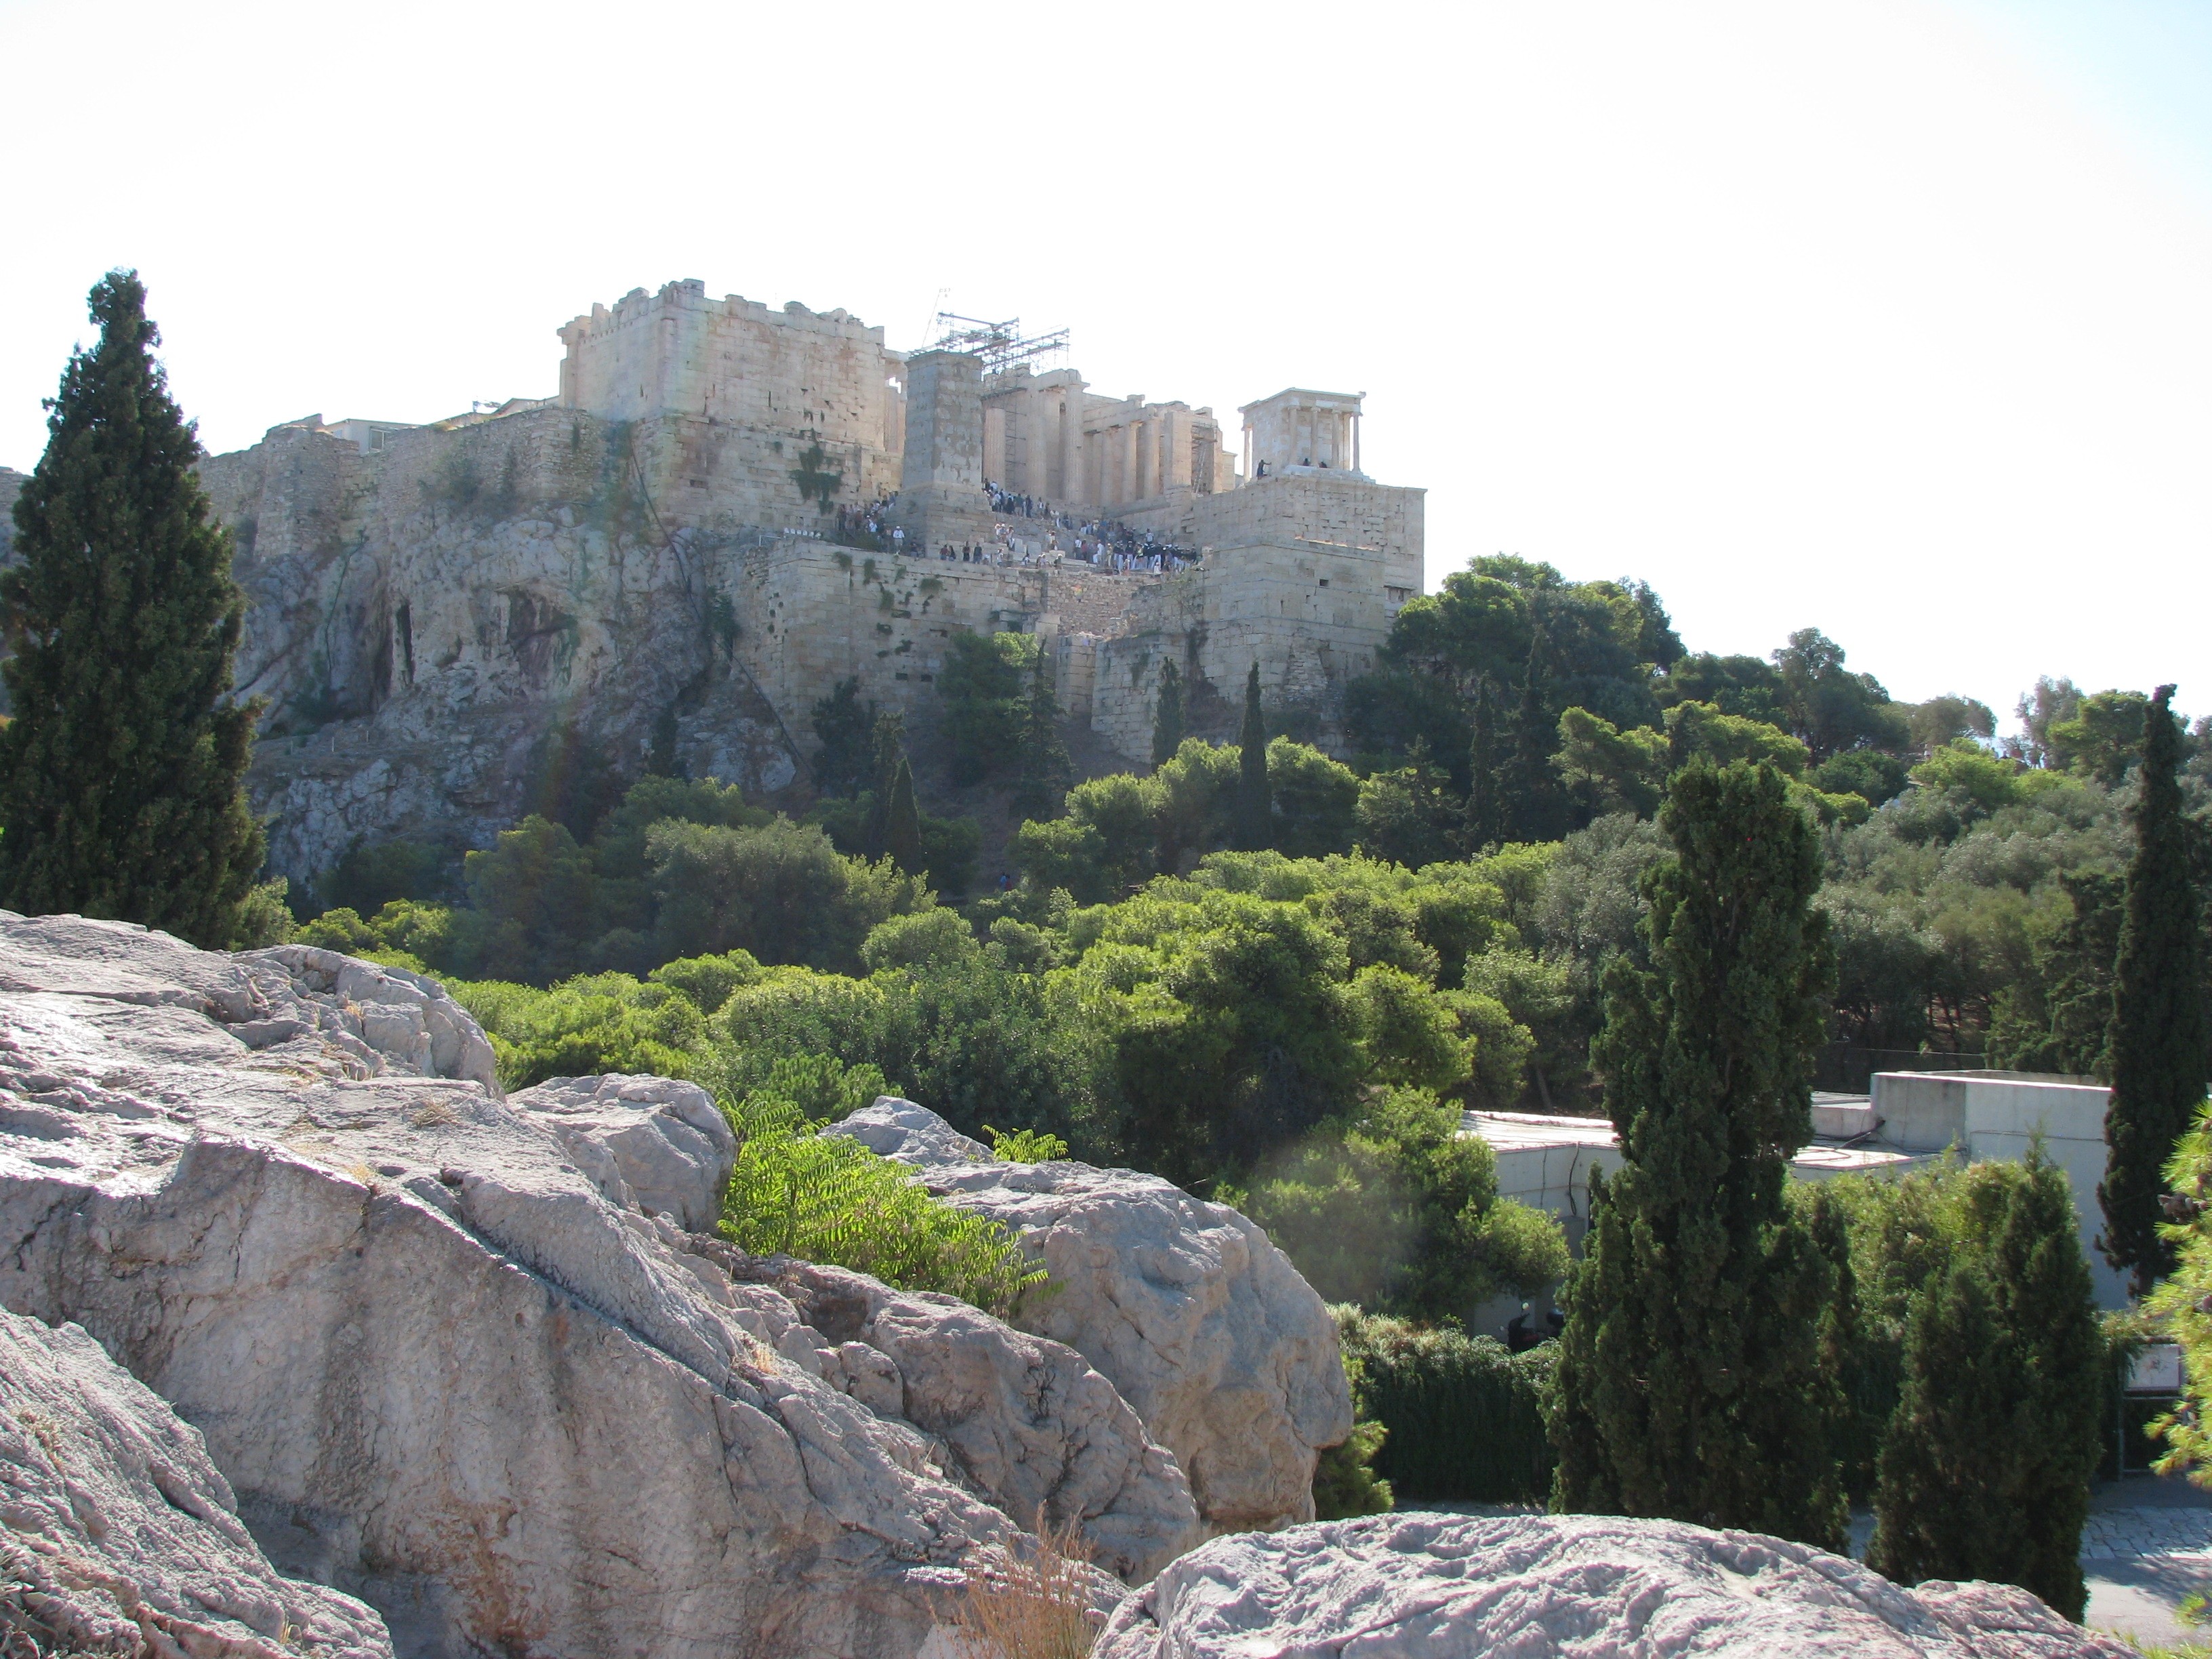 View of the Parthenon from Areopagus